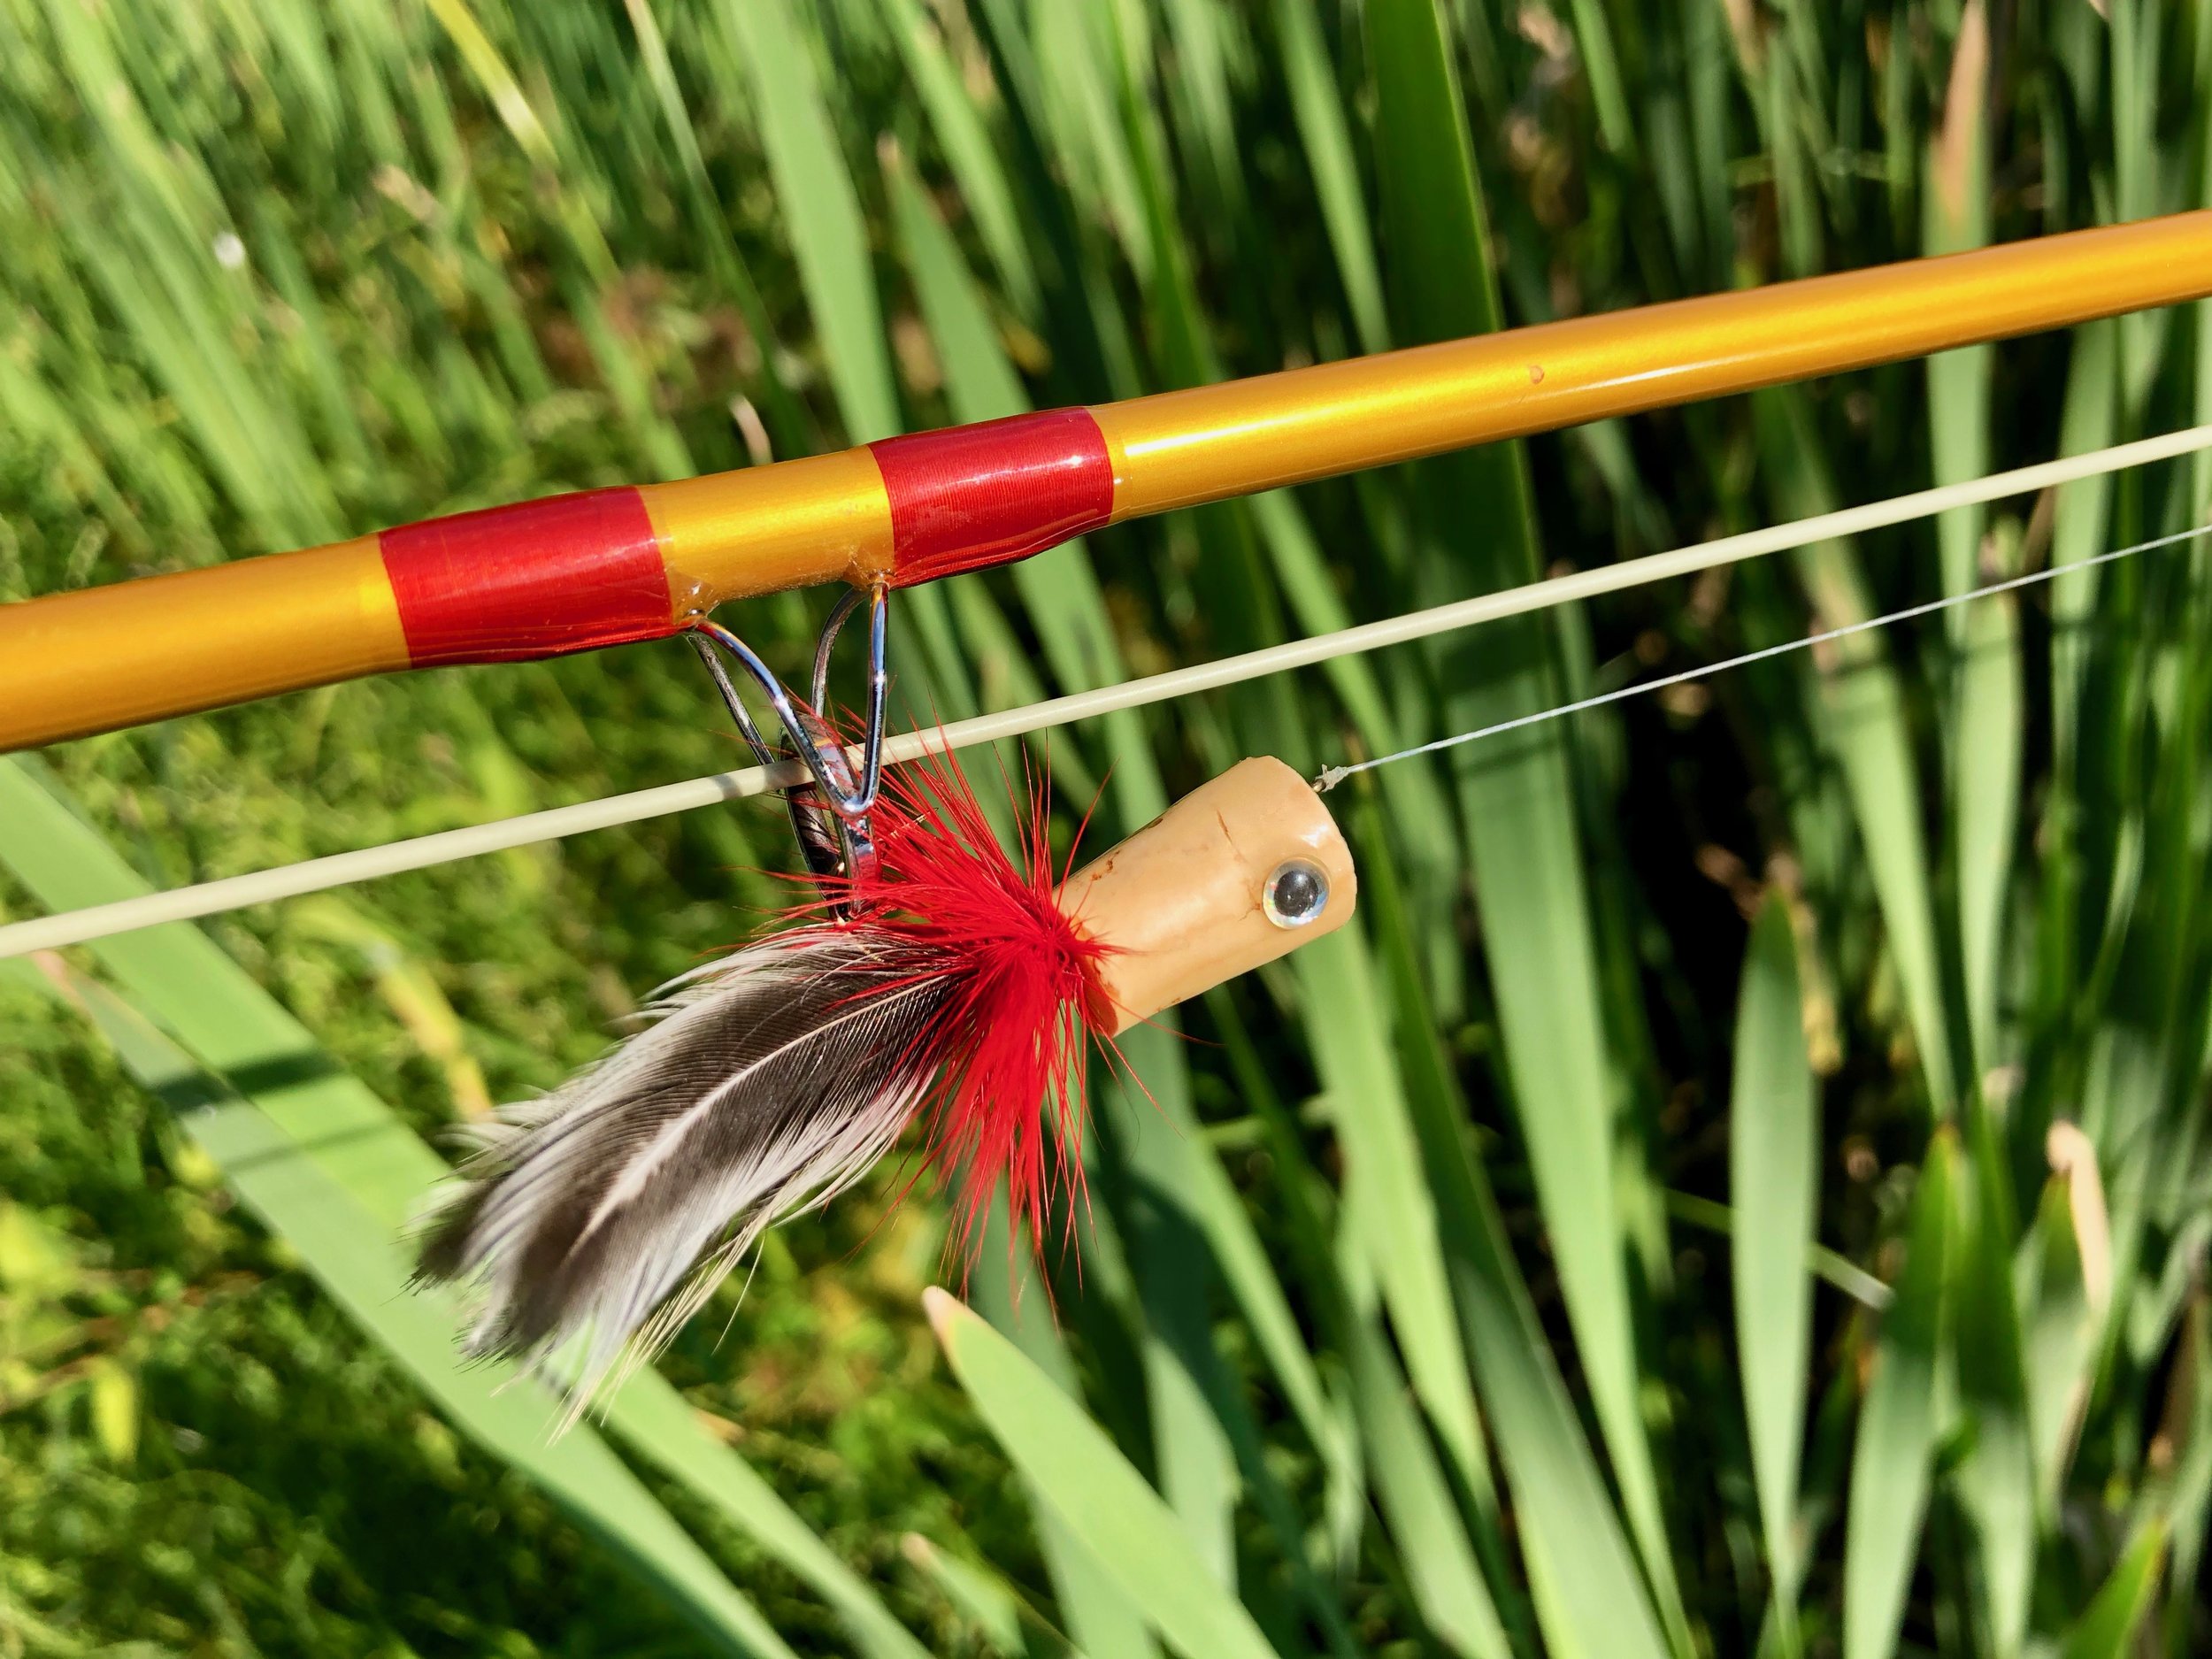 Simple Cork Poppers for Bass and Panfish — Panfish On The Fly